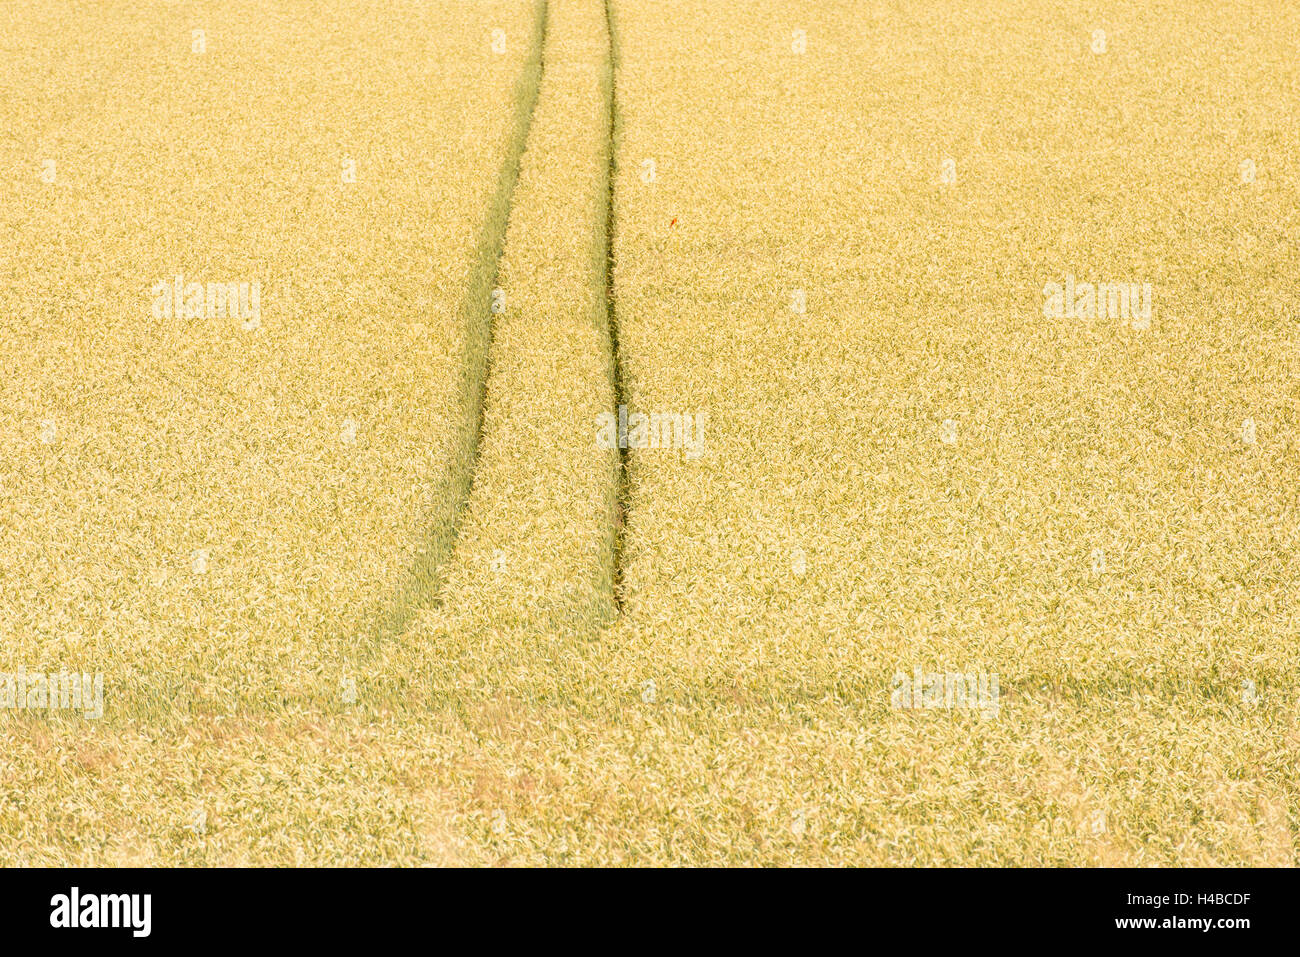 Yellow crop field with tracks in rural area, Sweden Stock Photo